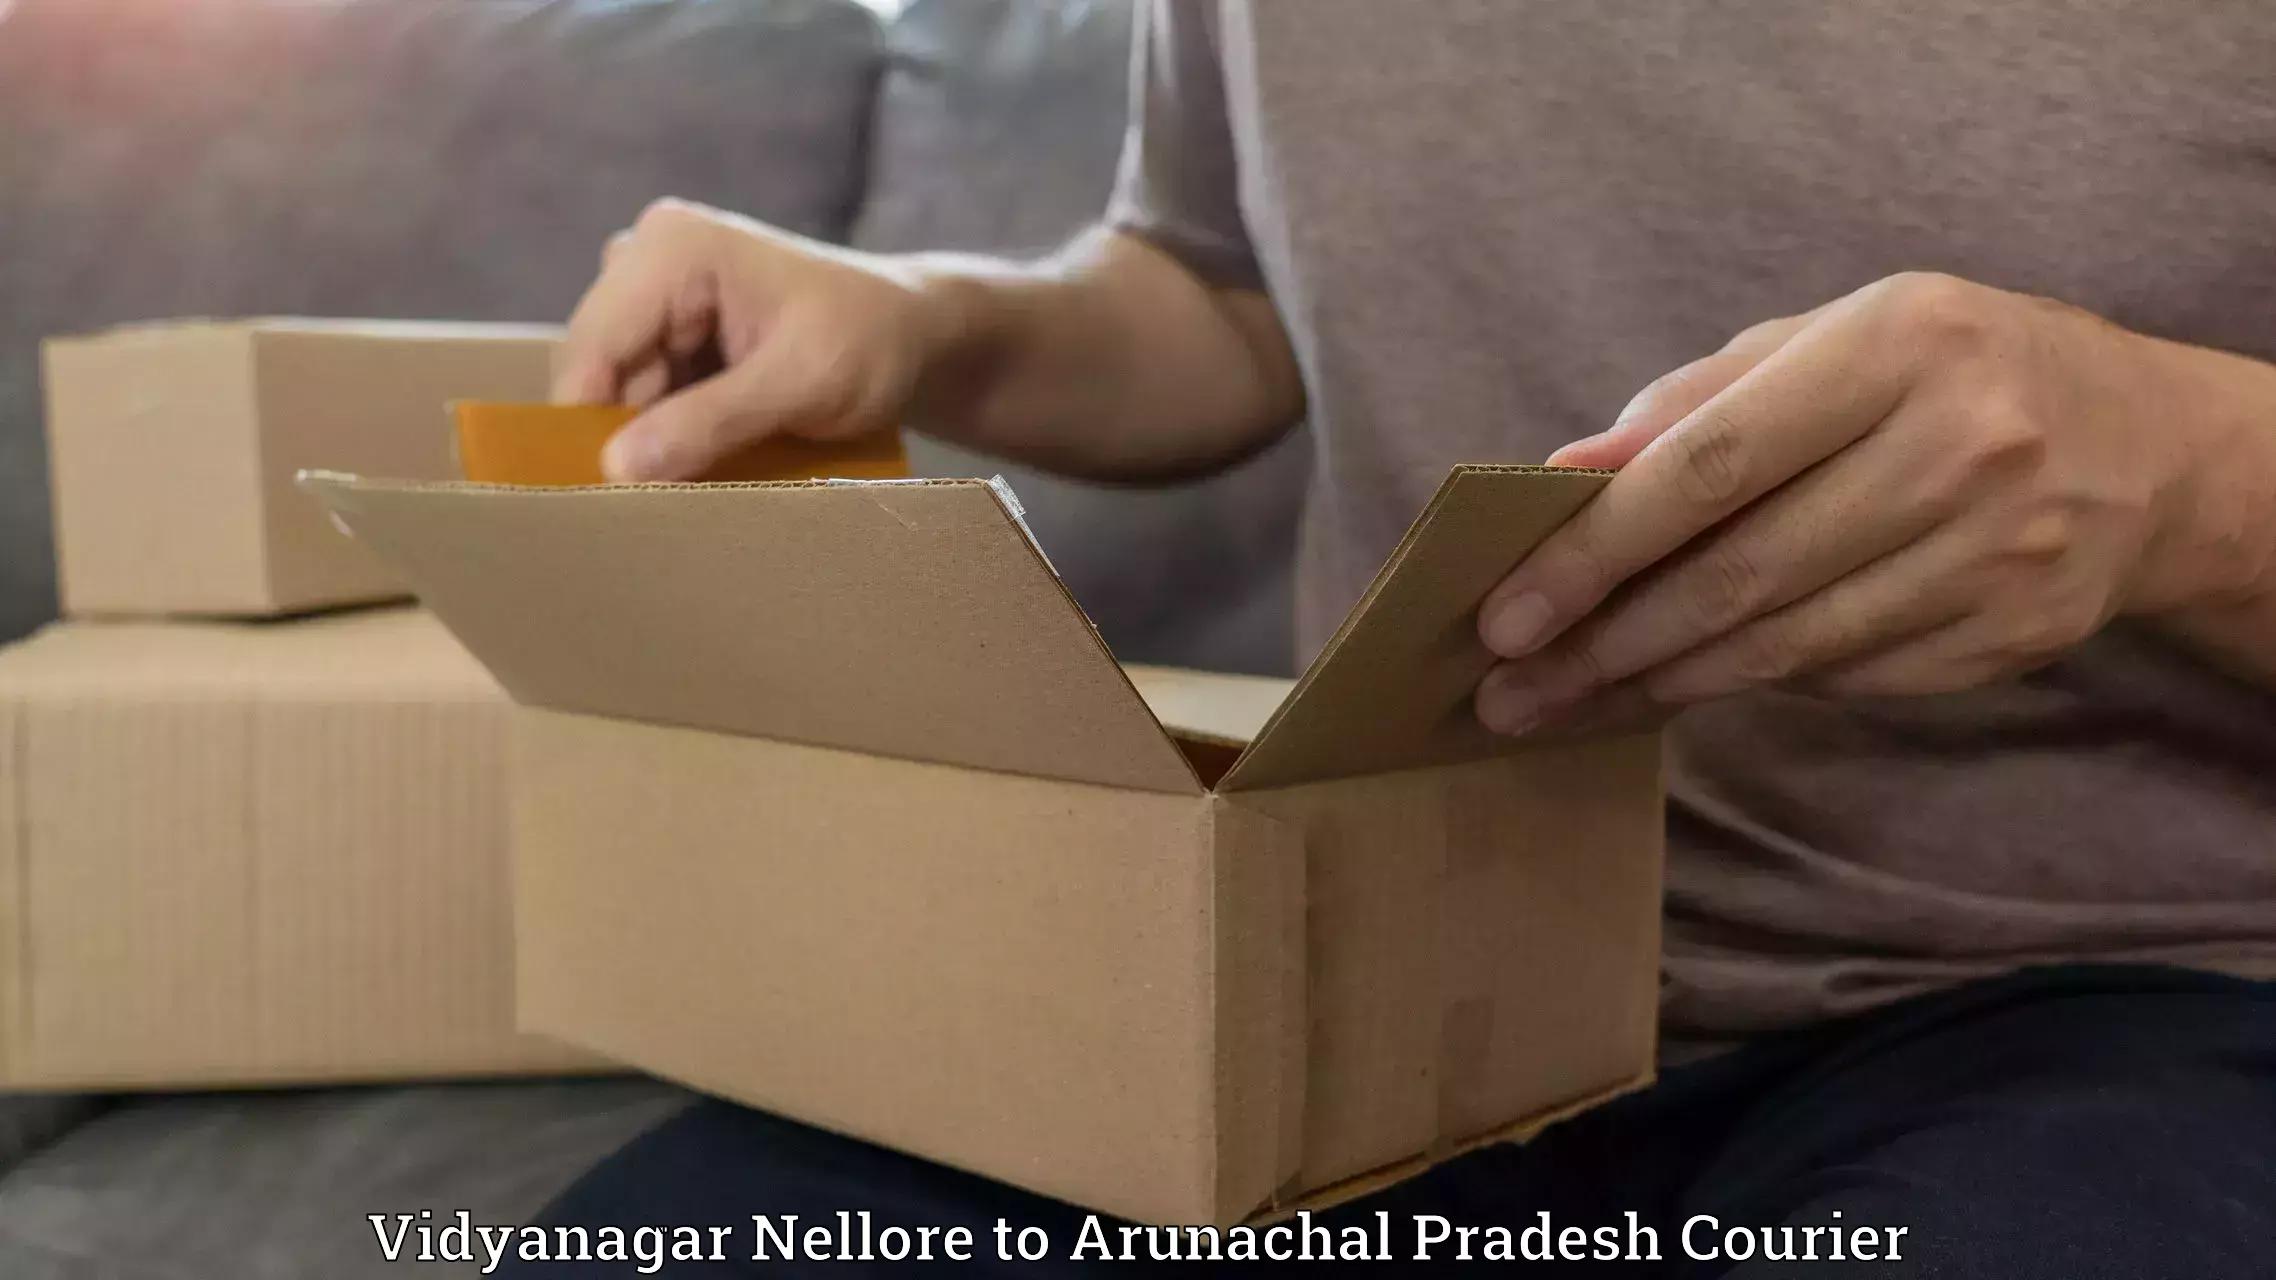 Package tracking in Vidyanagar Nellore to Deomali